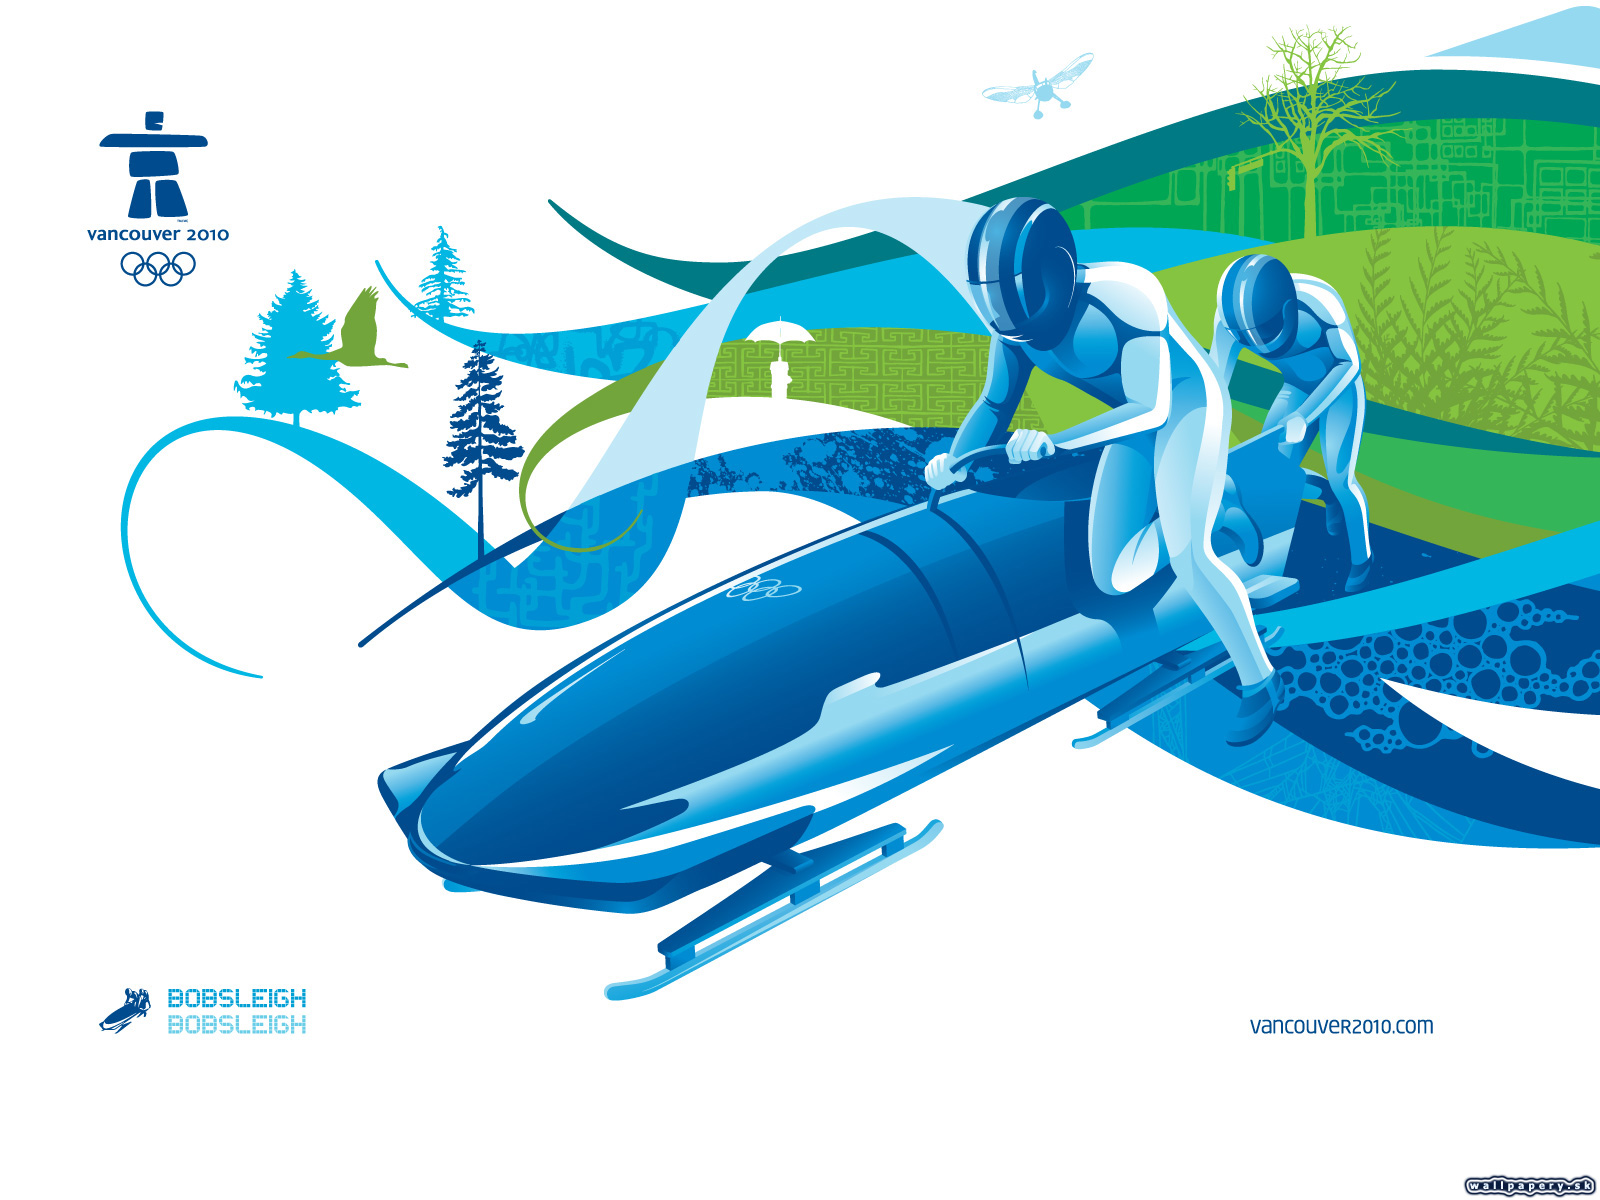 Vancouver 2010 - The Official Video Game of the Olympic Winter Games - wallpaper 22